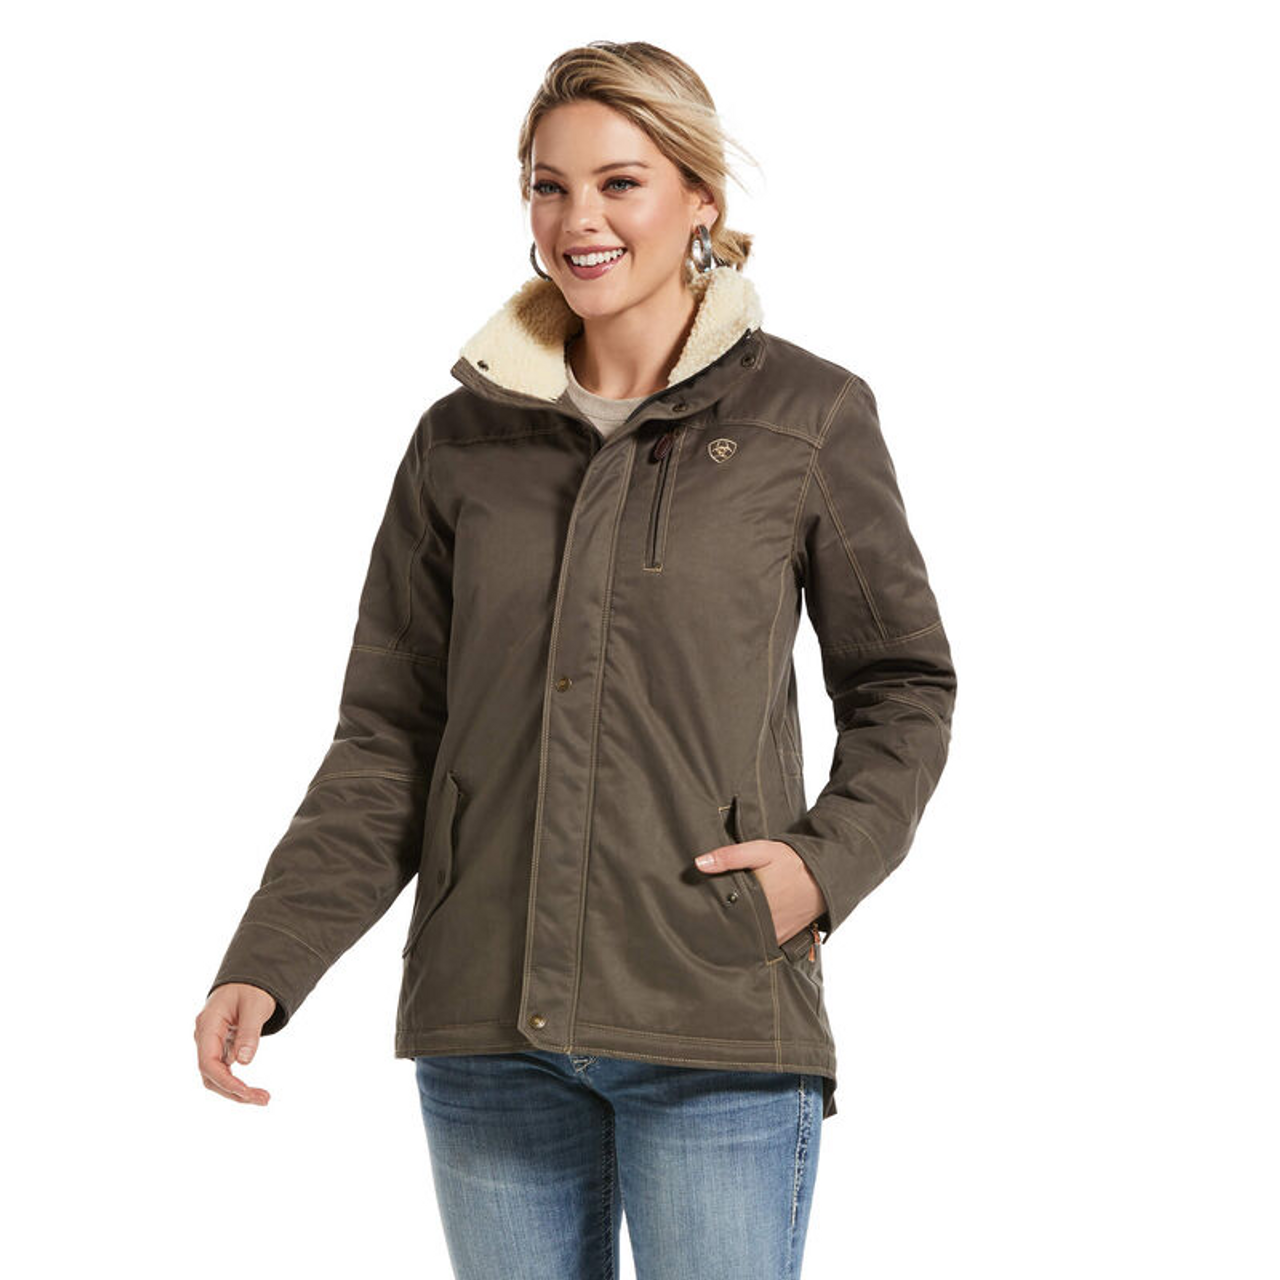 https://cdn11.bigcommerce.com/s-mkx5msl2io/images/stencil/1280x1280/products/13781/71751/REAL-GRIZZLY-chestnut-LADIES-JACKET-JACKET-10047767__S_1__08931.1693154144.png?c=1